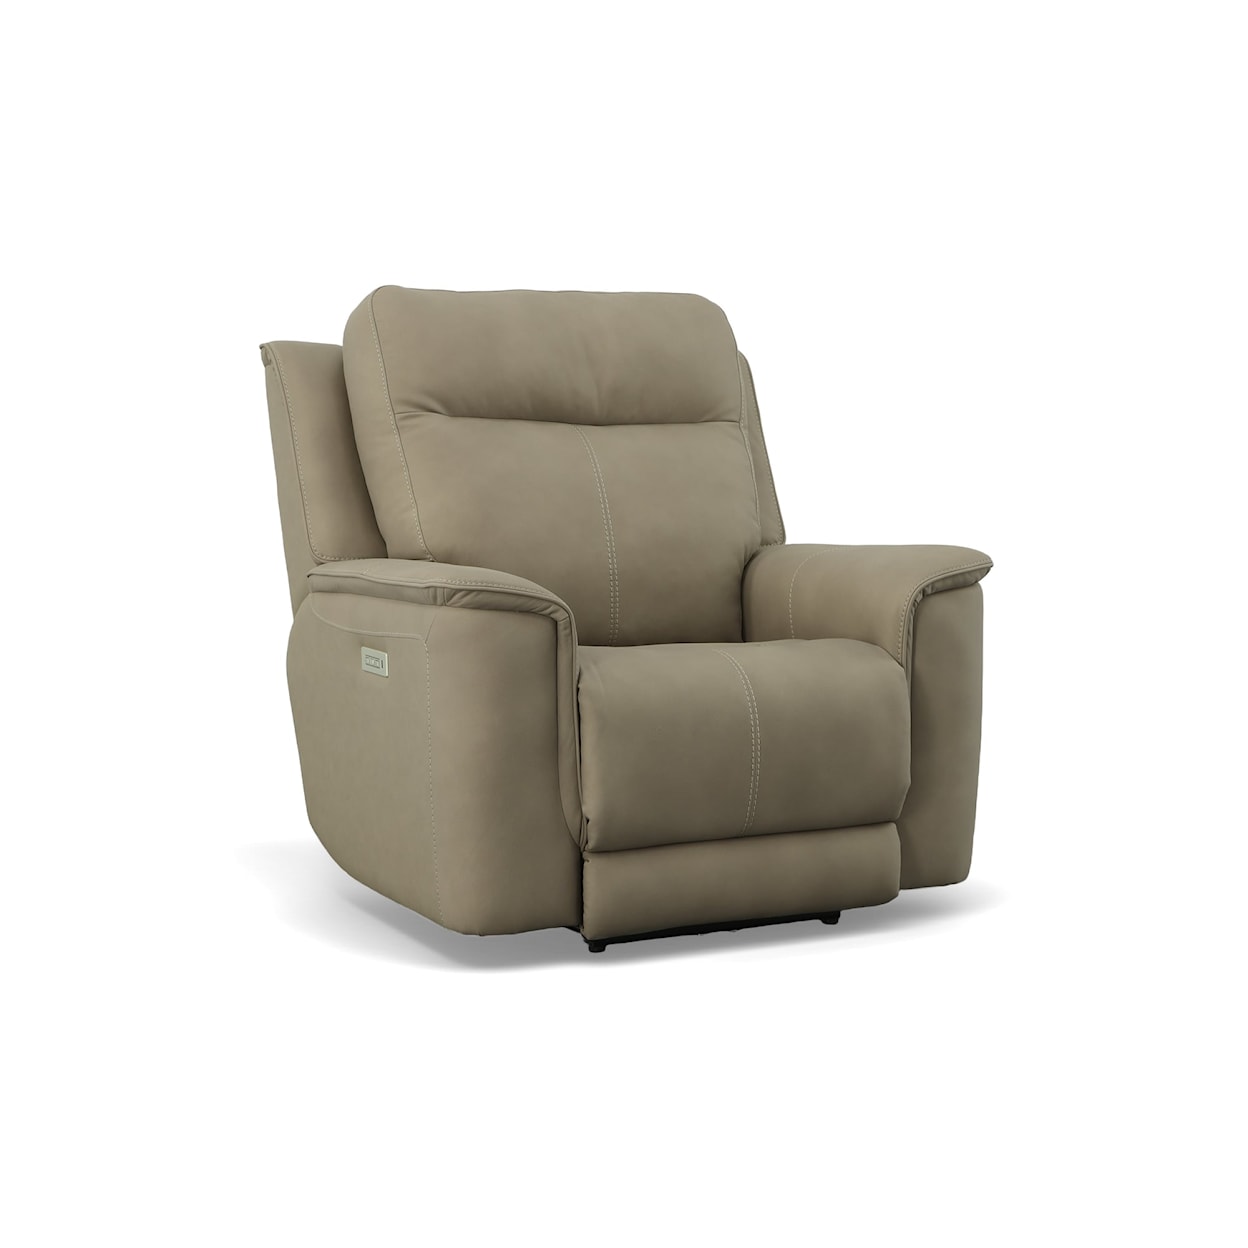 Stanton 728 Power Reclining Chair with Power Headrest